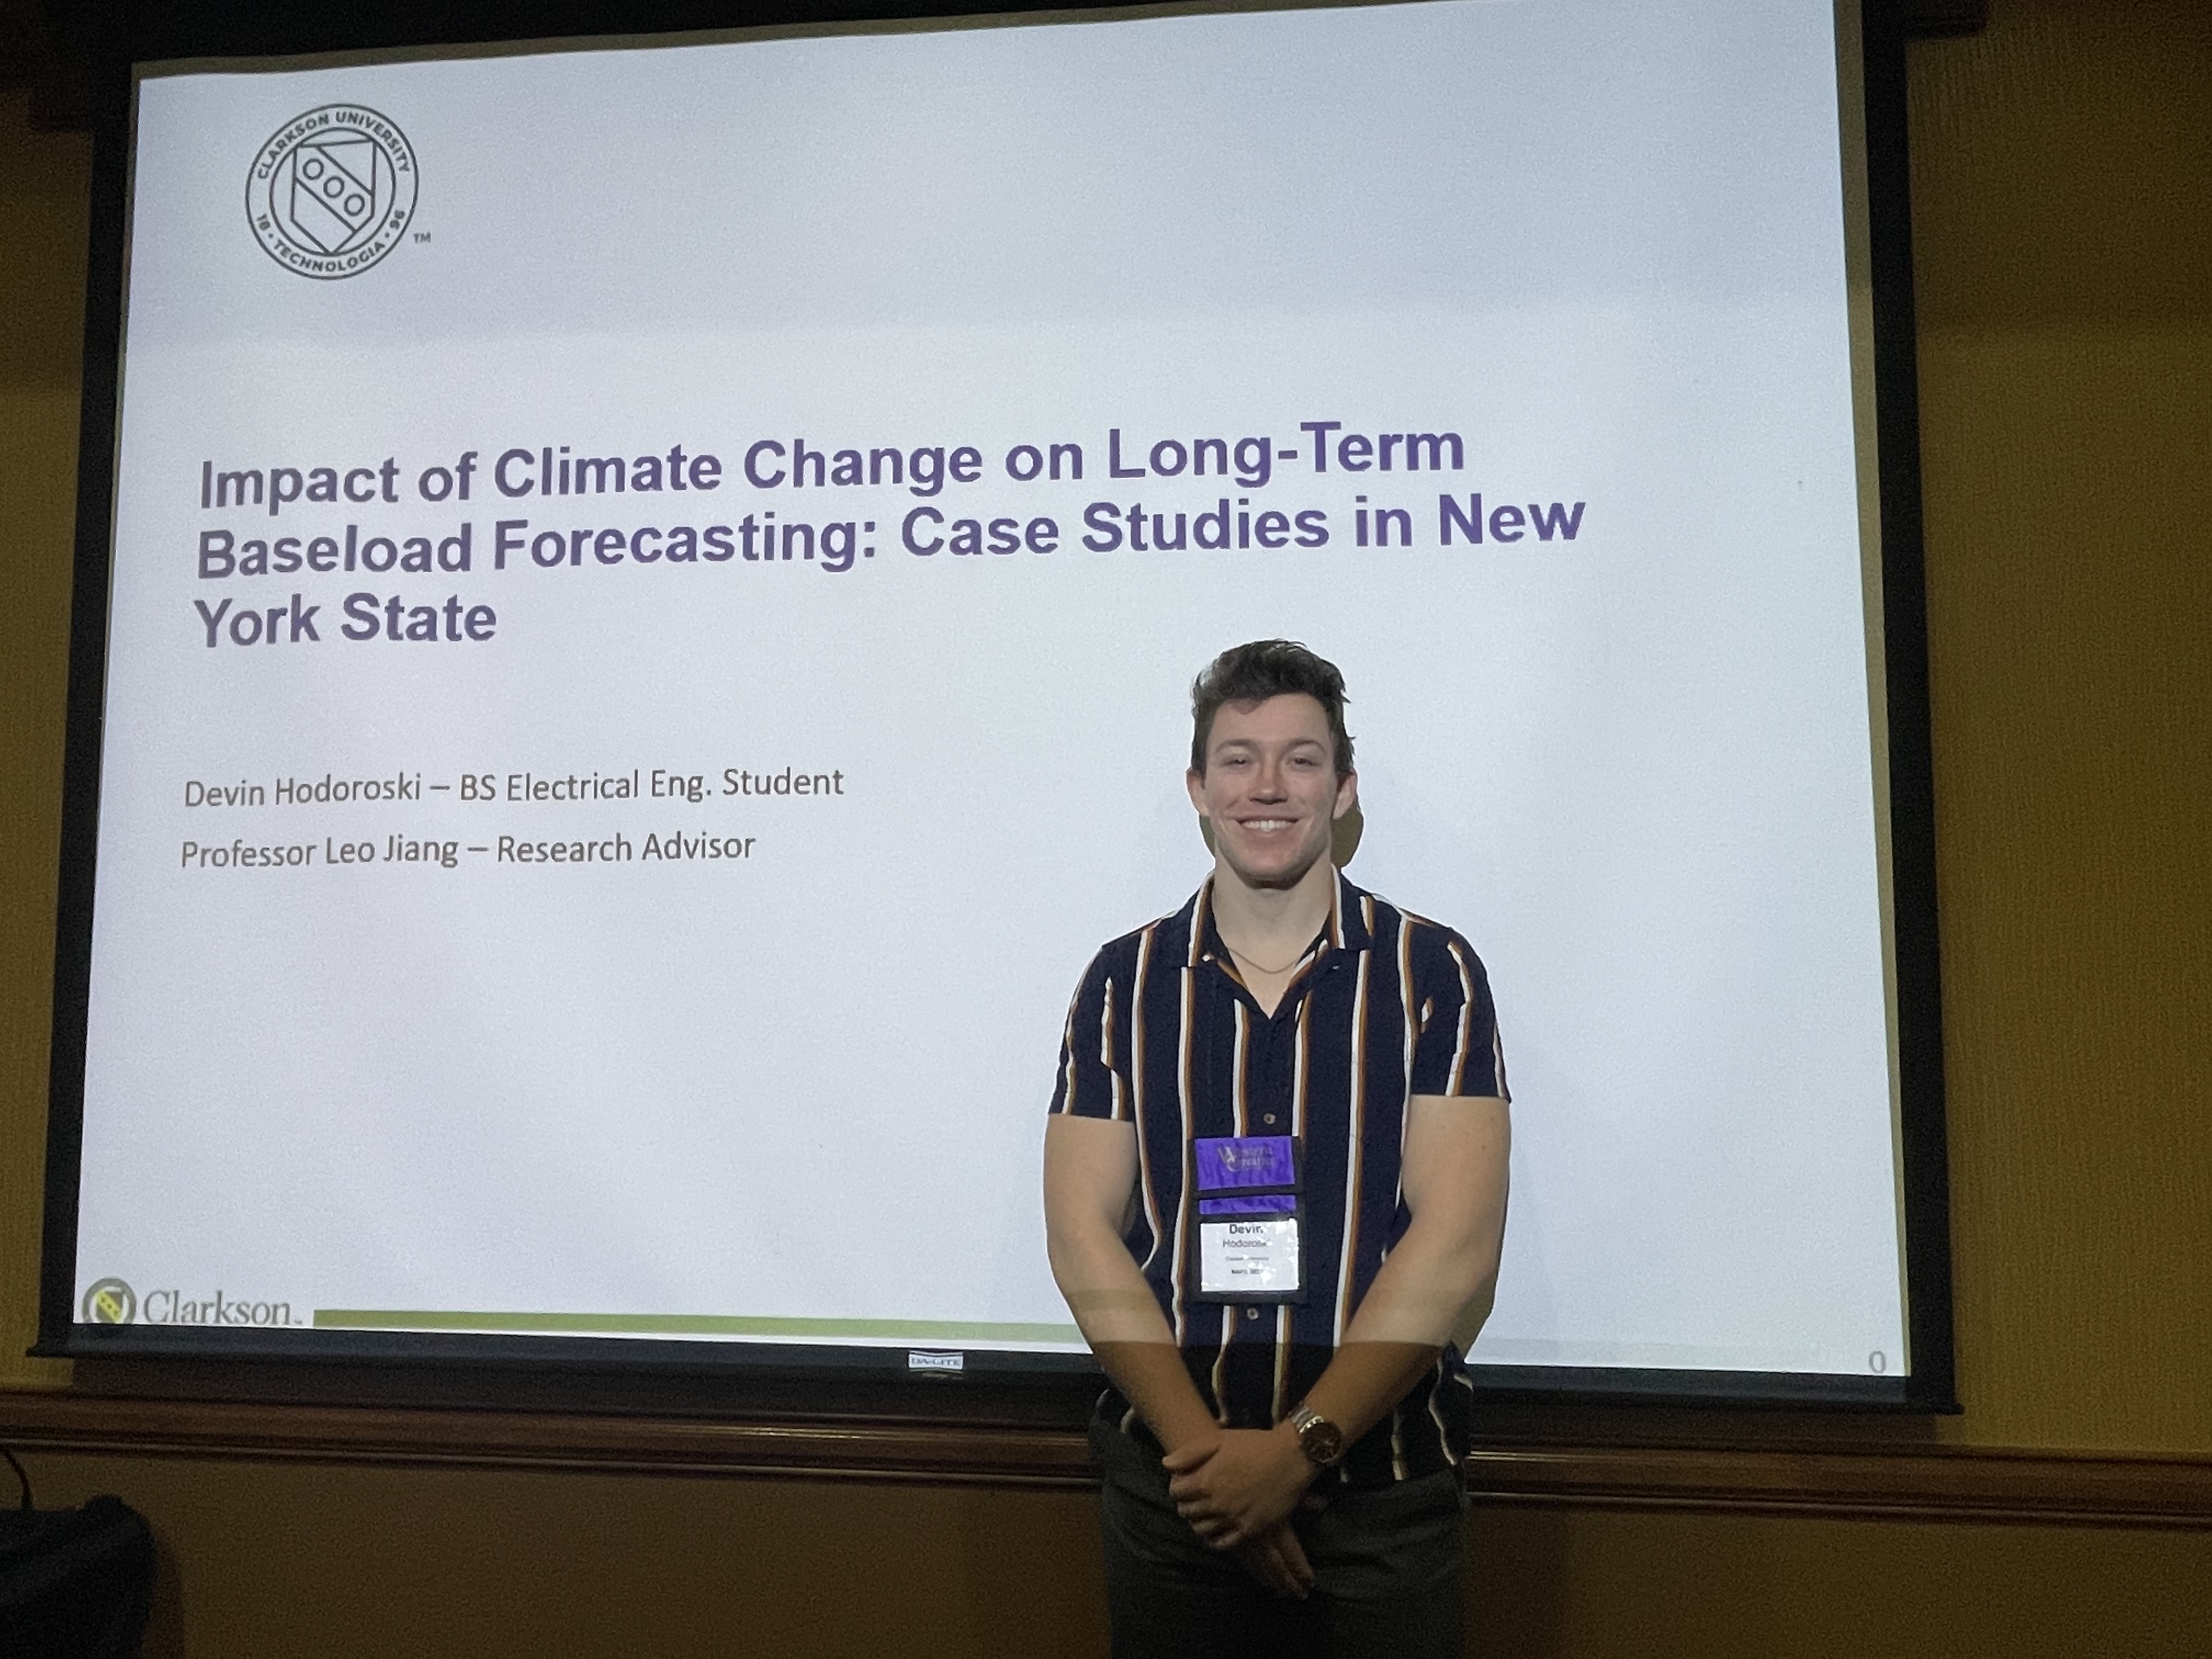 Devin Hodoroski stands in front of the title slide of their presentation at the North American Power Symposium